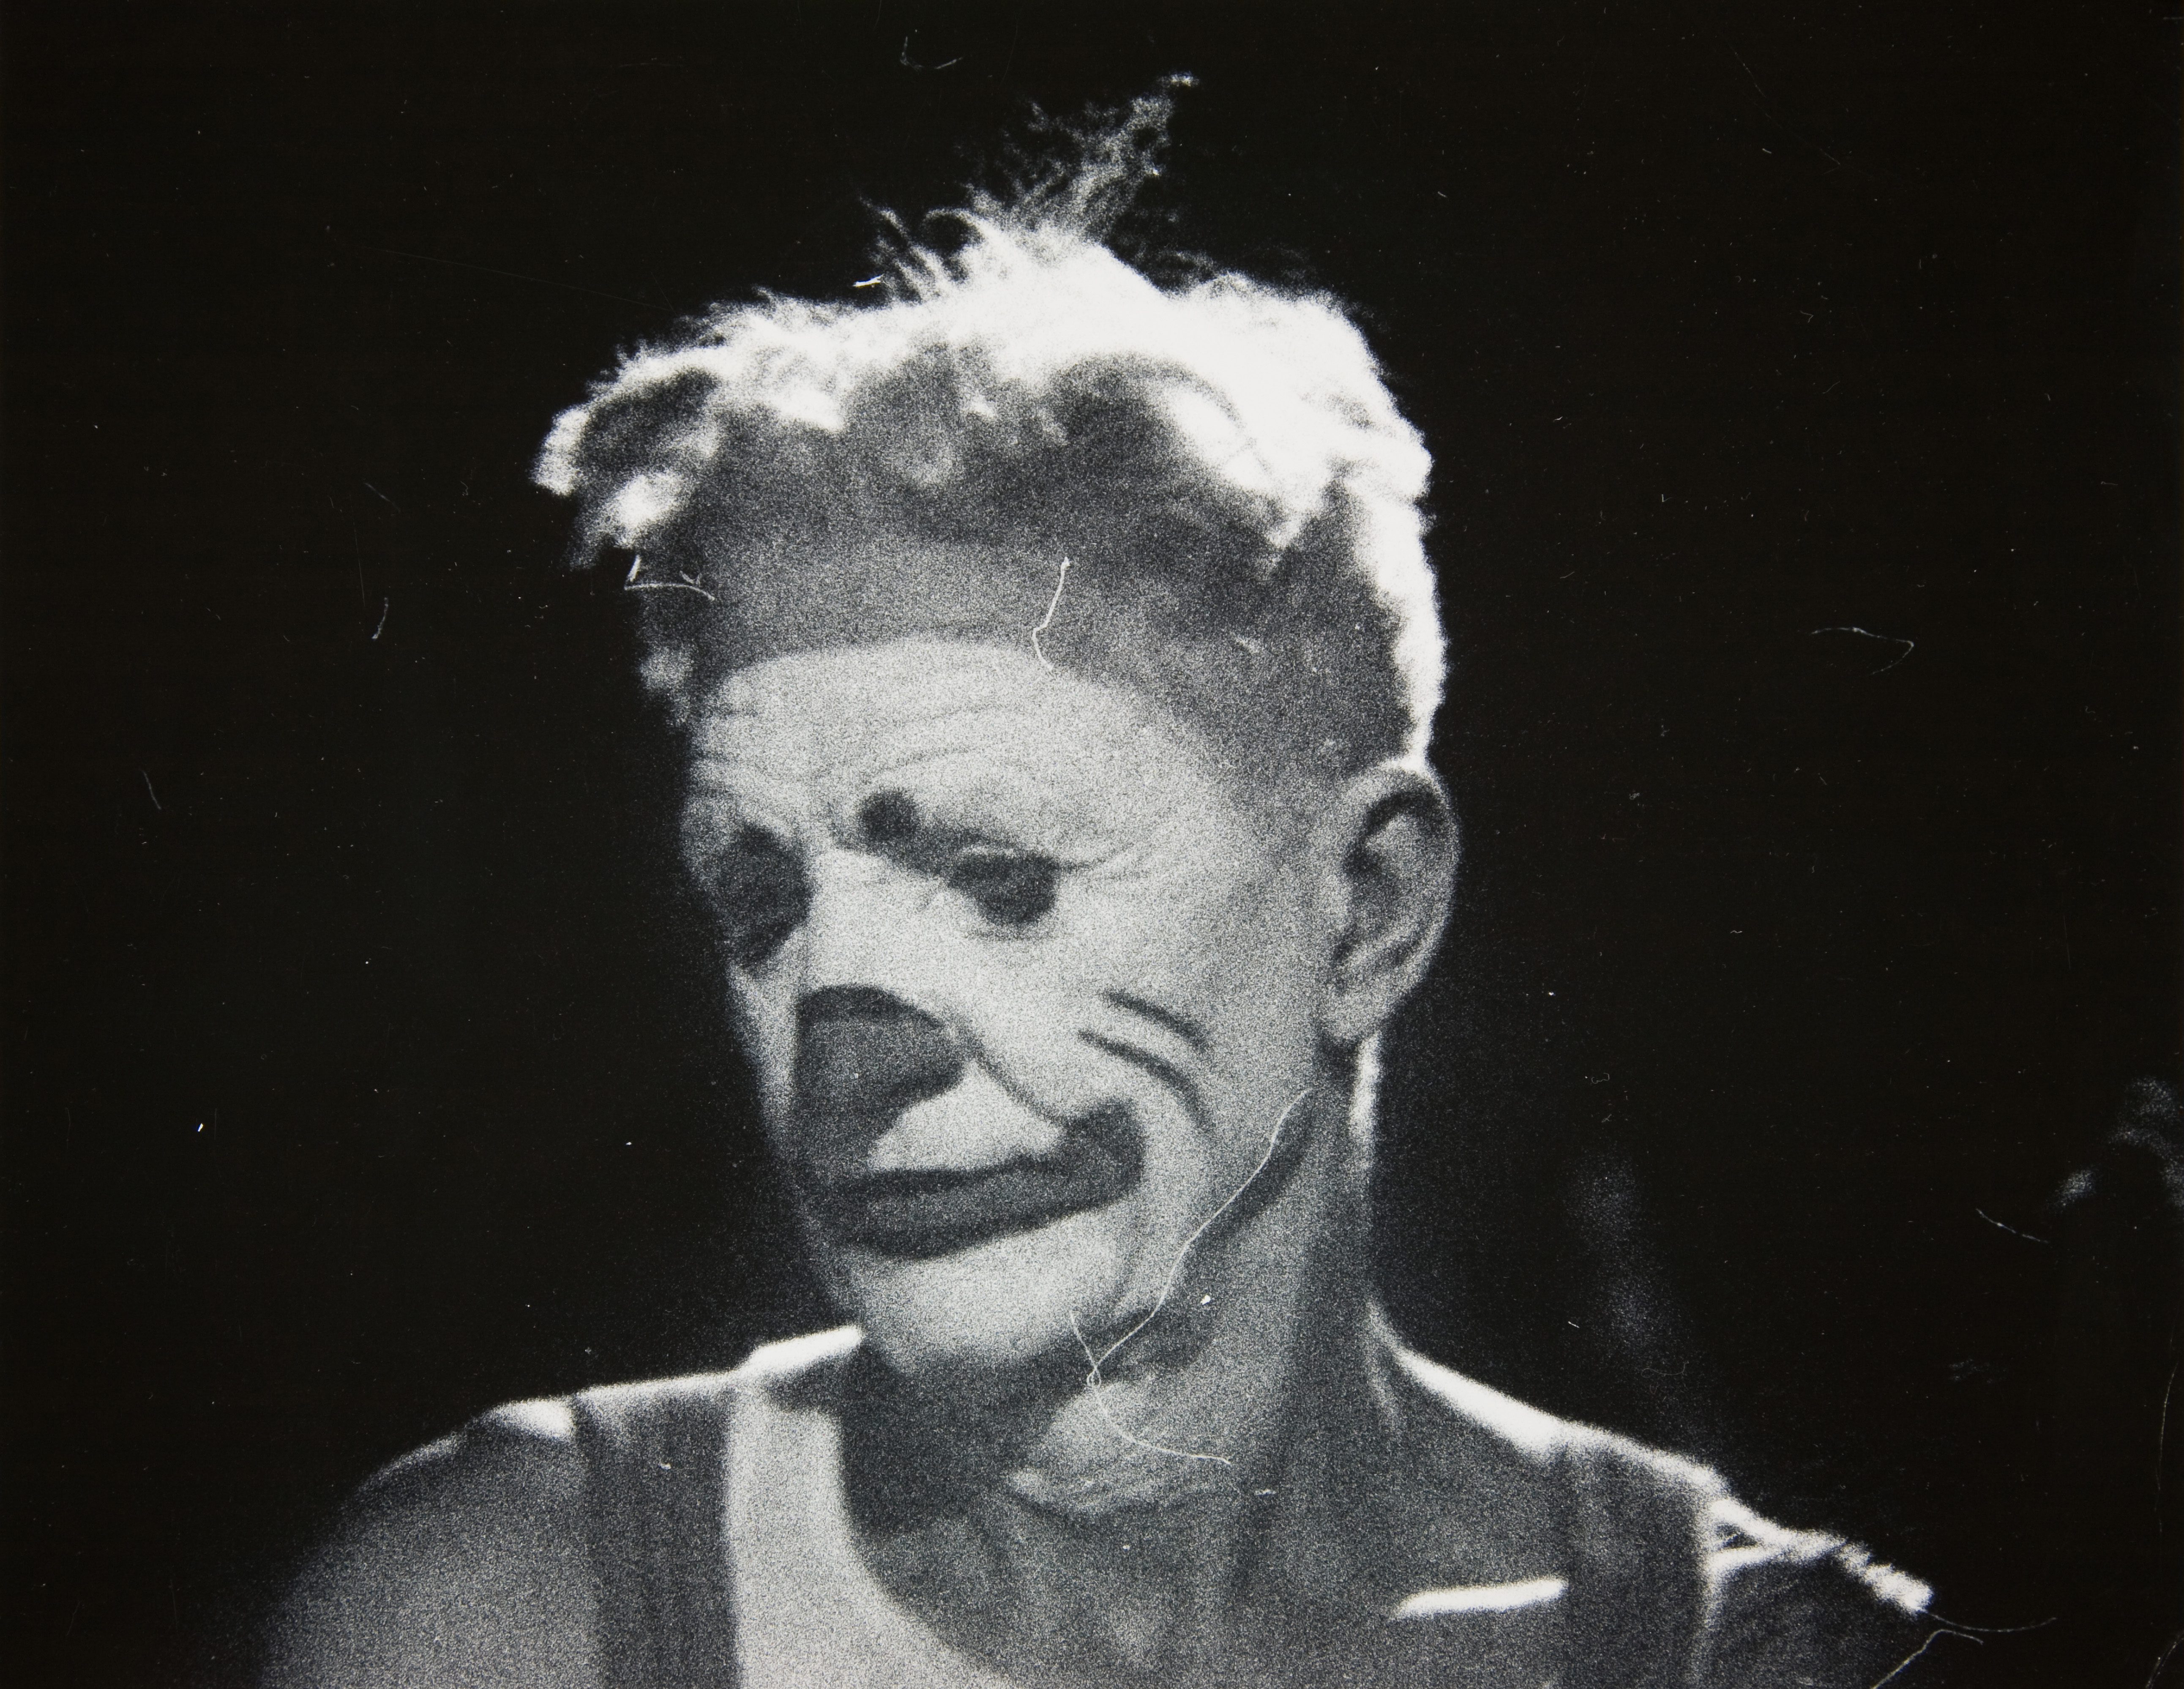 A black and white photo of figure in clown make up. The figure looks down and to the side as though sad.